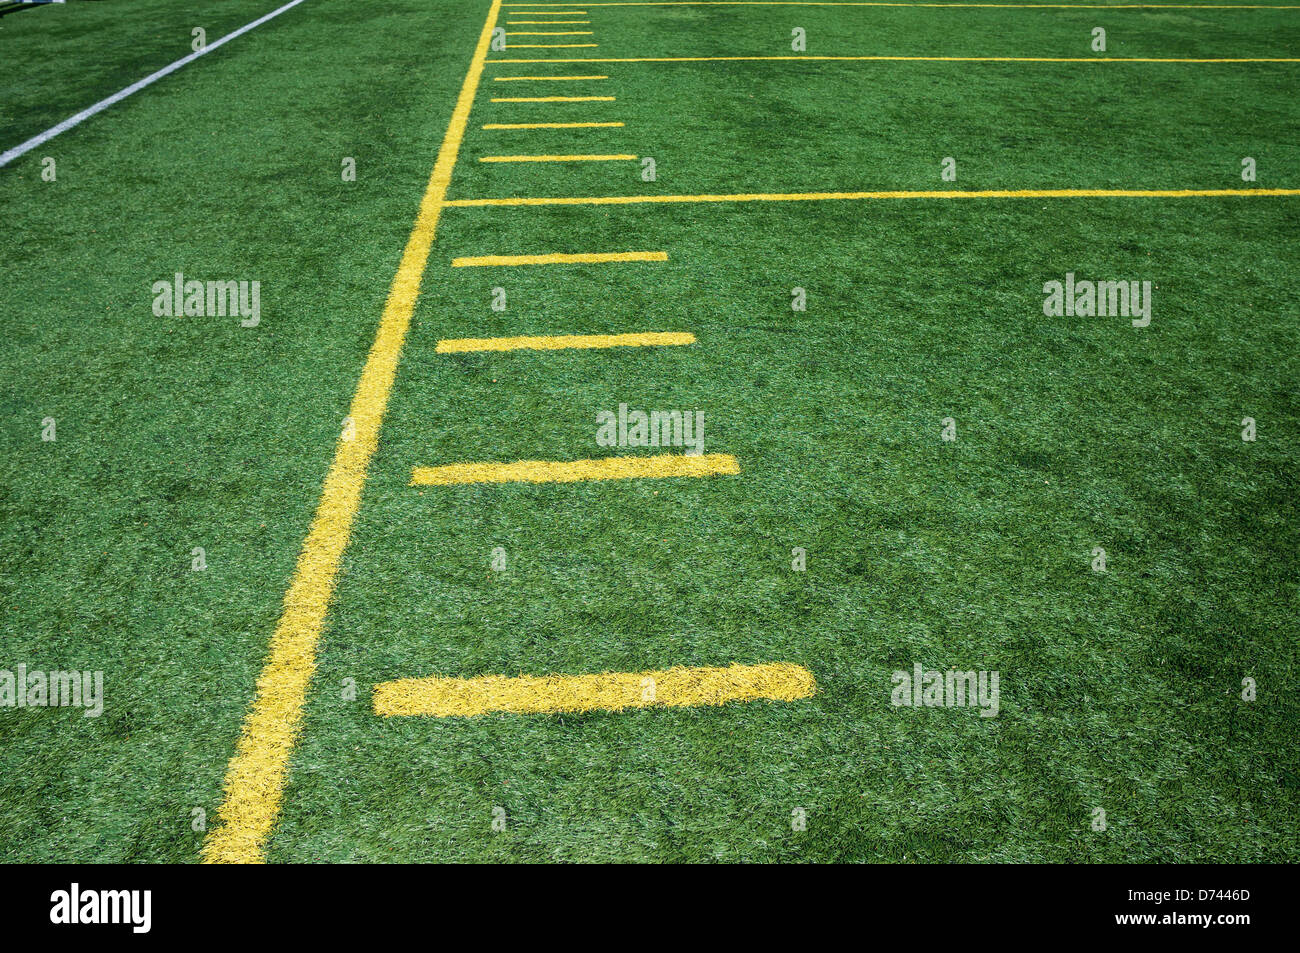 Sideline on American Football artificial turf field with hash marks. Stock Photo